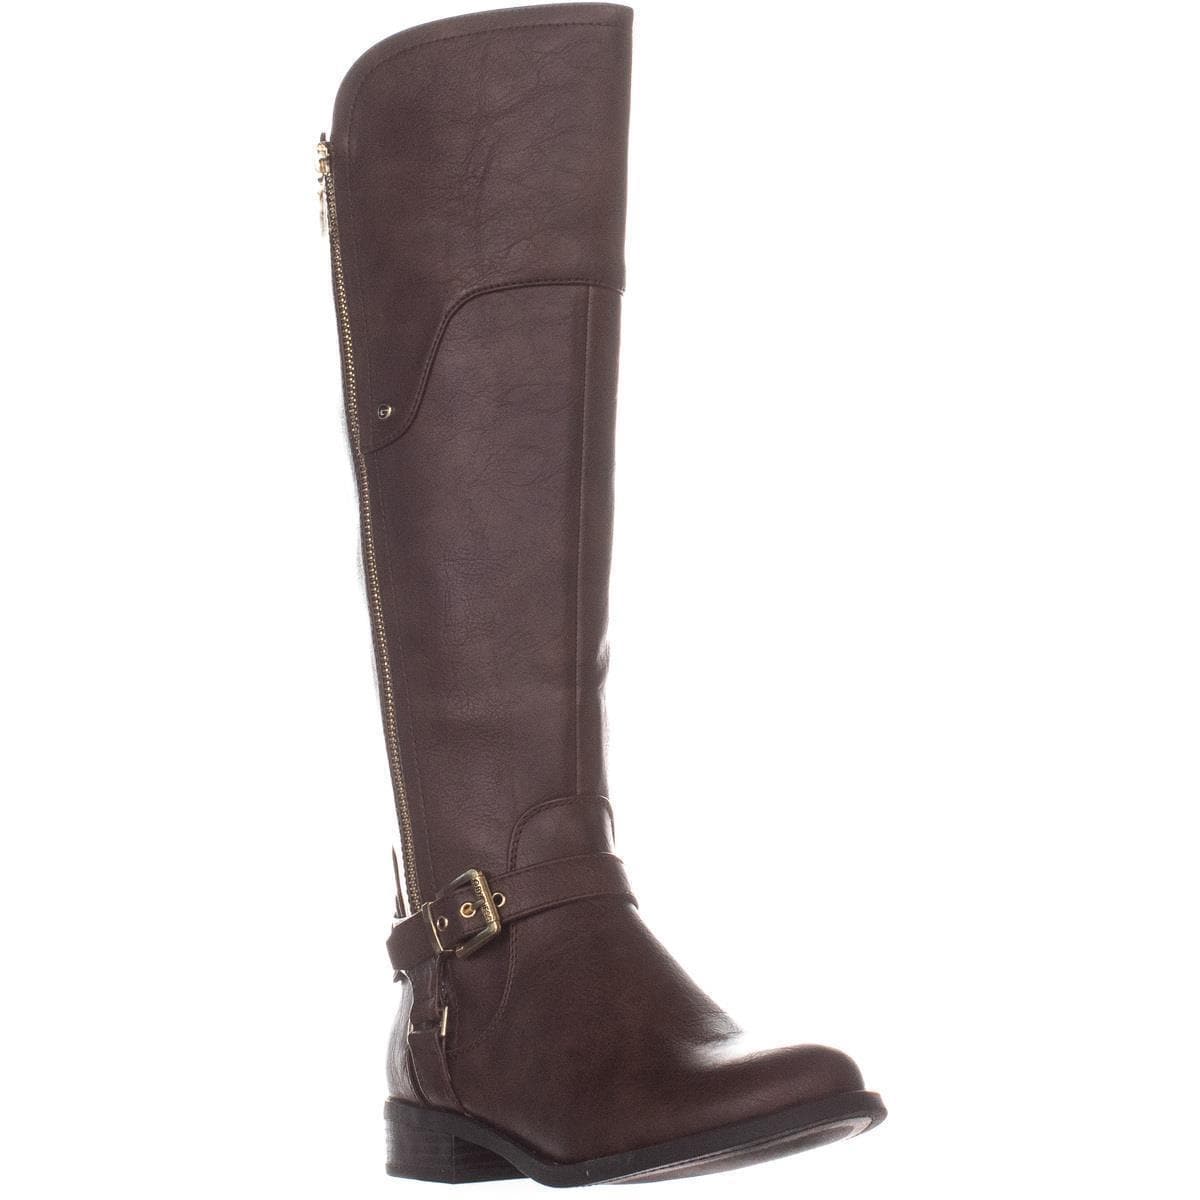 G by Guess Harson5 Wide Calf Knee High 